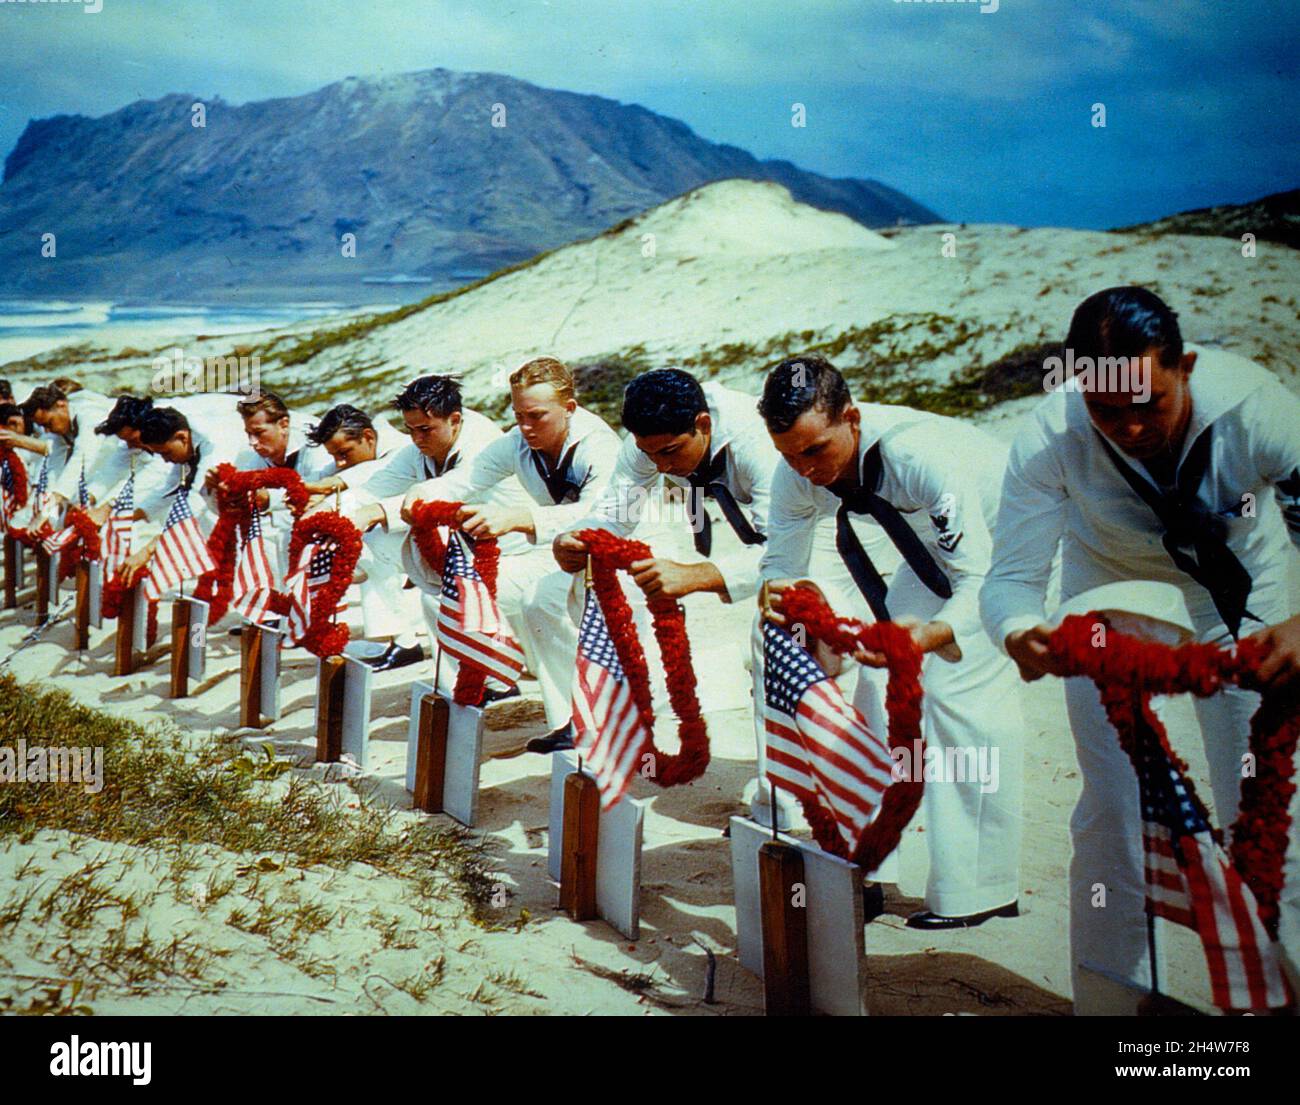 Sailors pay tribute to casualties of the Pearl Harbor attack at a Hawaiian Islands cemetery, circa Spring 1942, possibly Memorial Day. Stock Photo